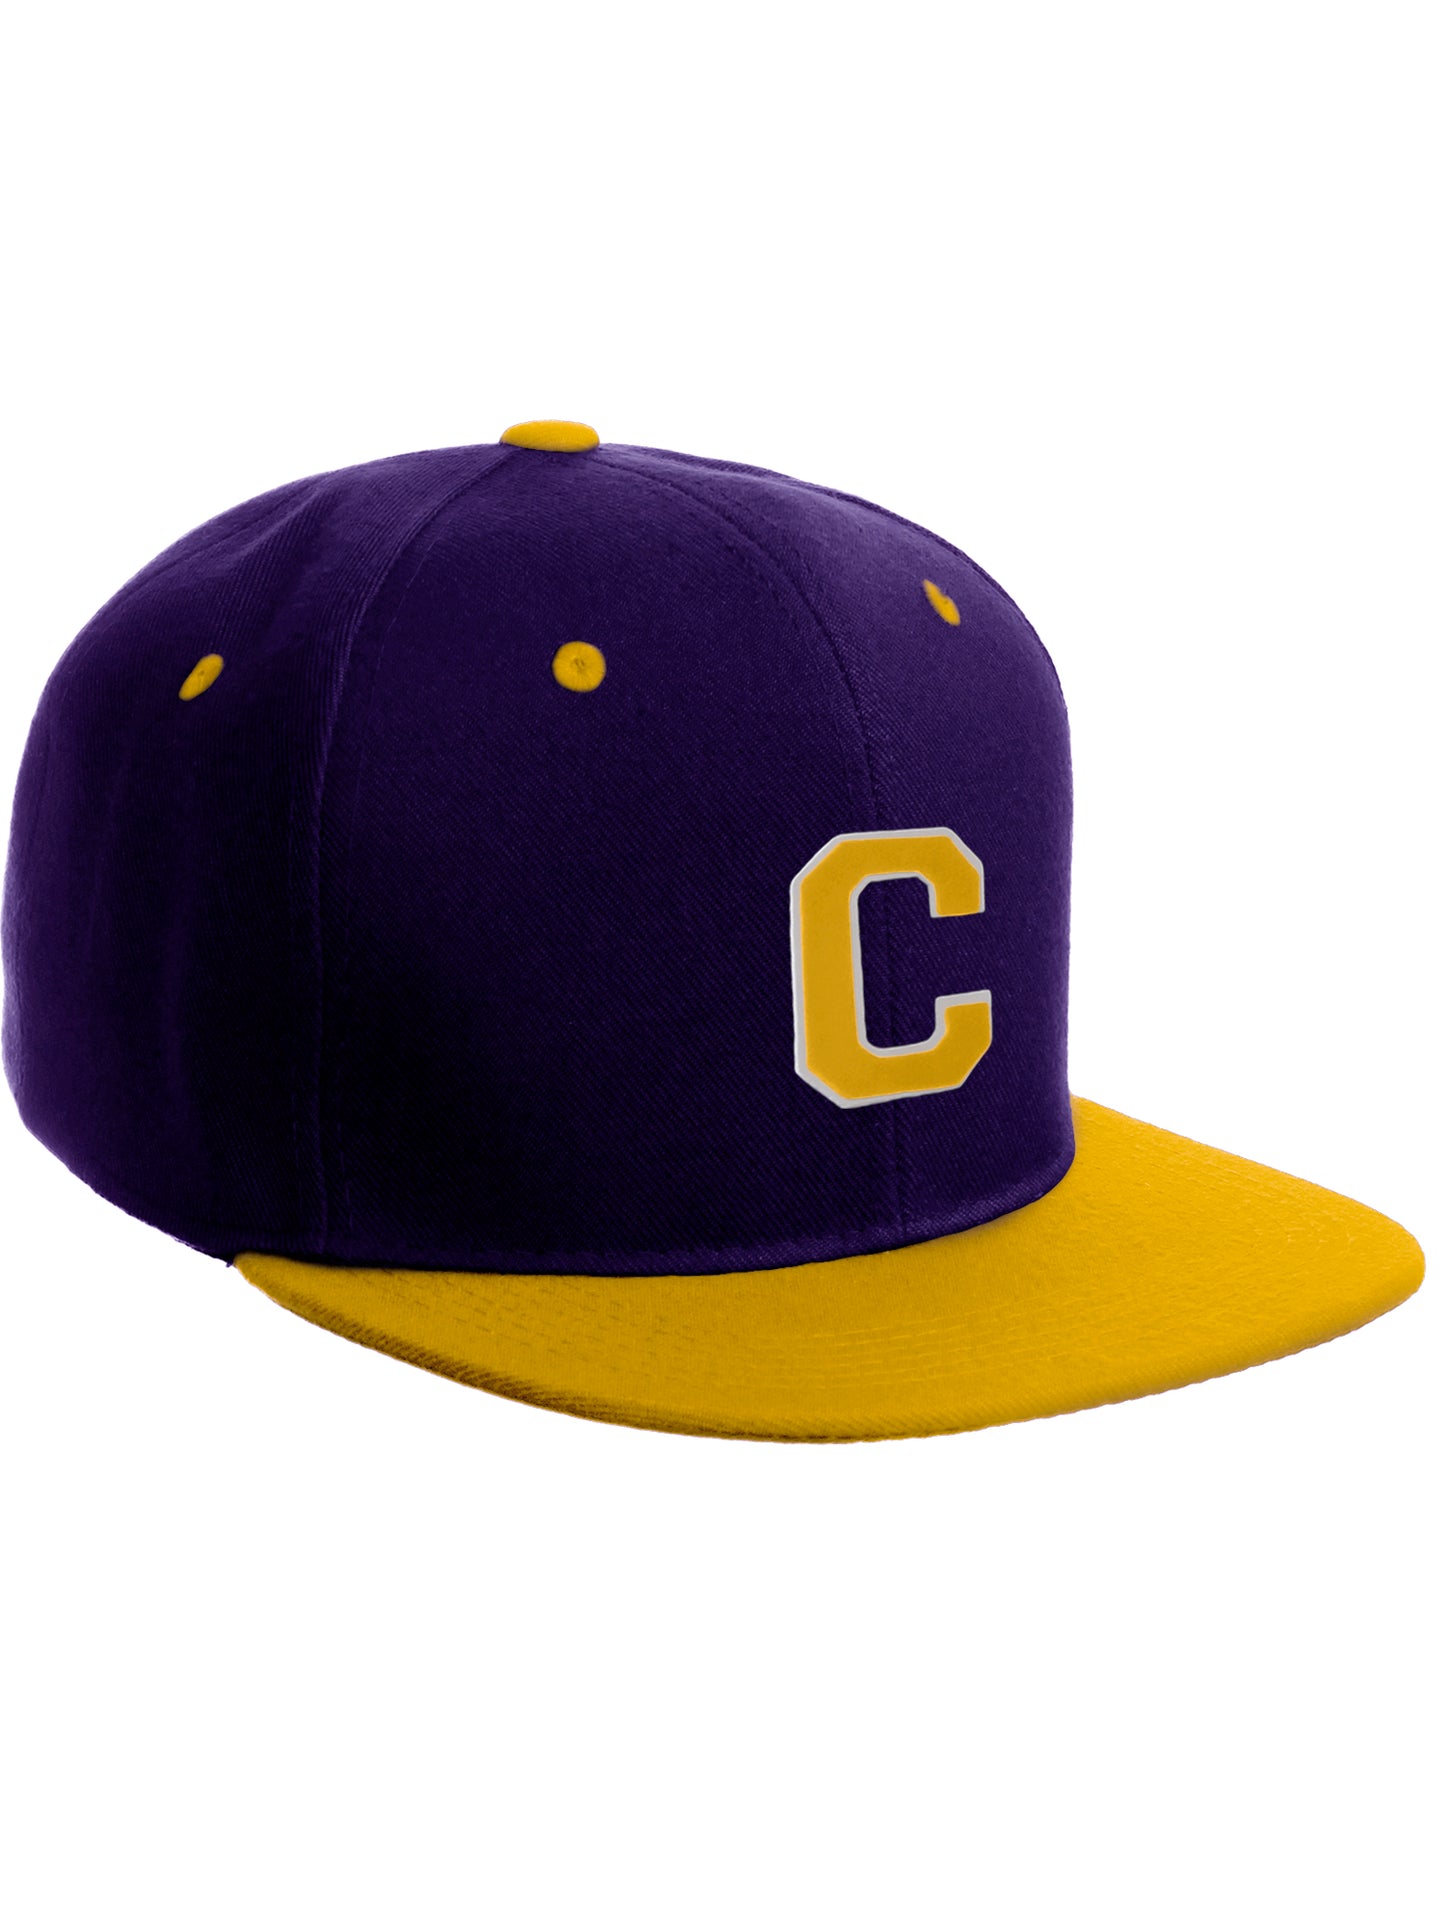 Classic Snapback Hat Custom A to Z Initial Letters, Purple Gold Cap White Gold